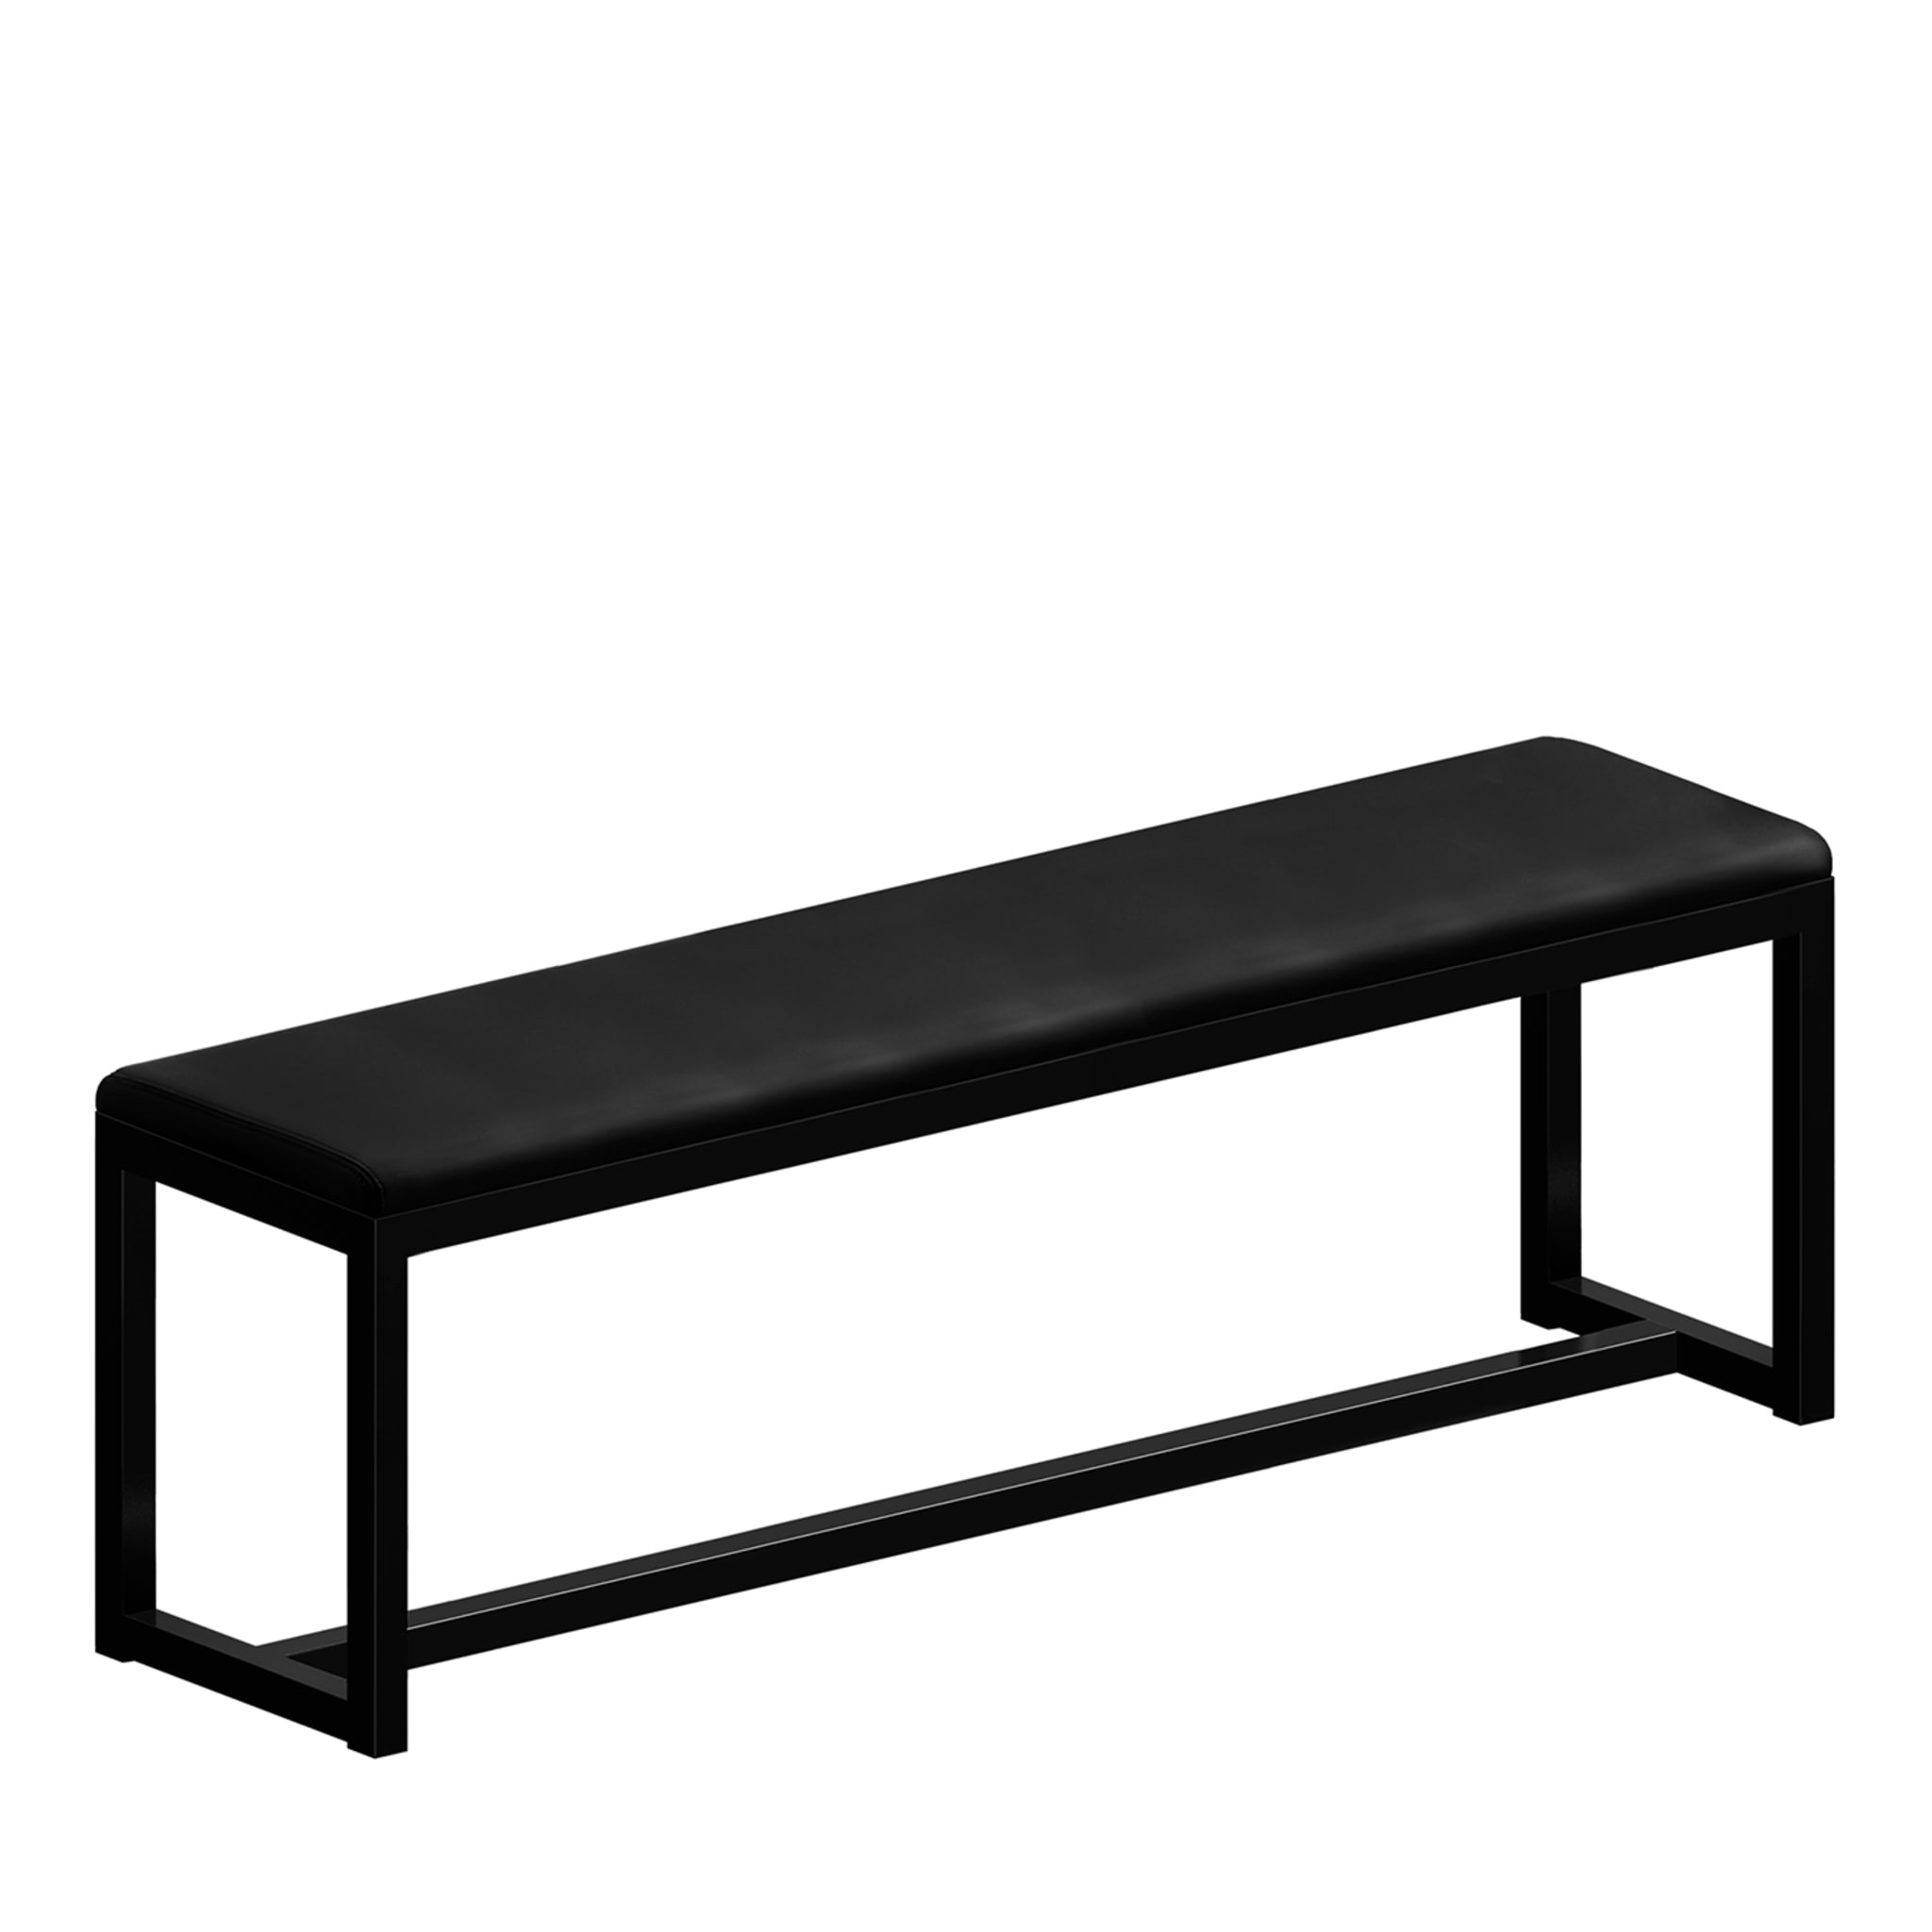 Big Brother Small Black Bench by Maurizio Peregalli - Main view